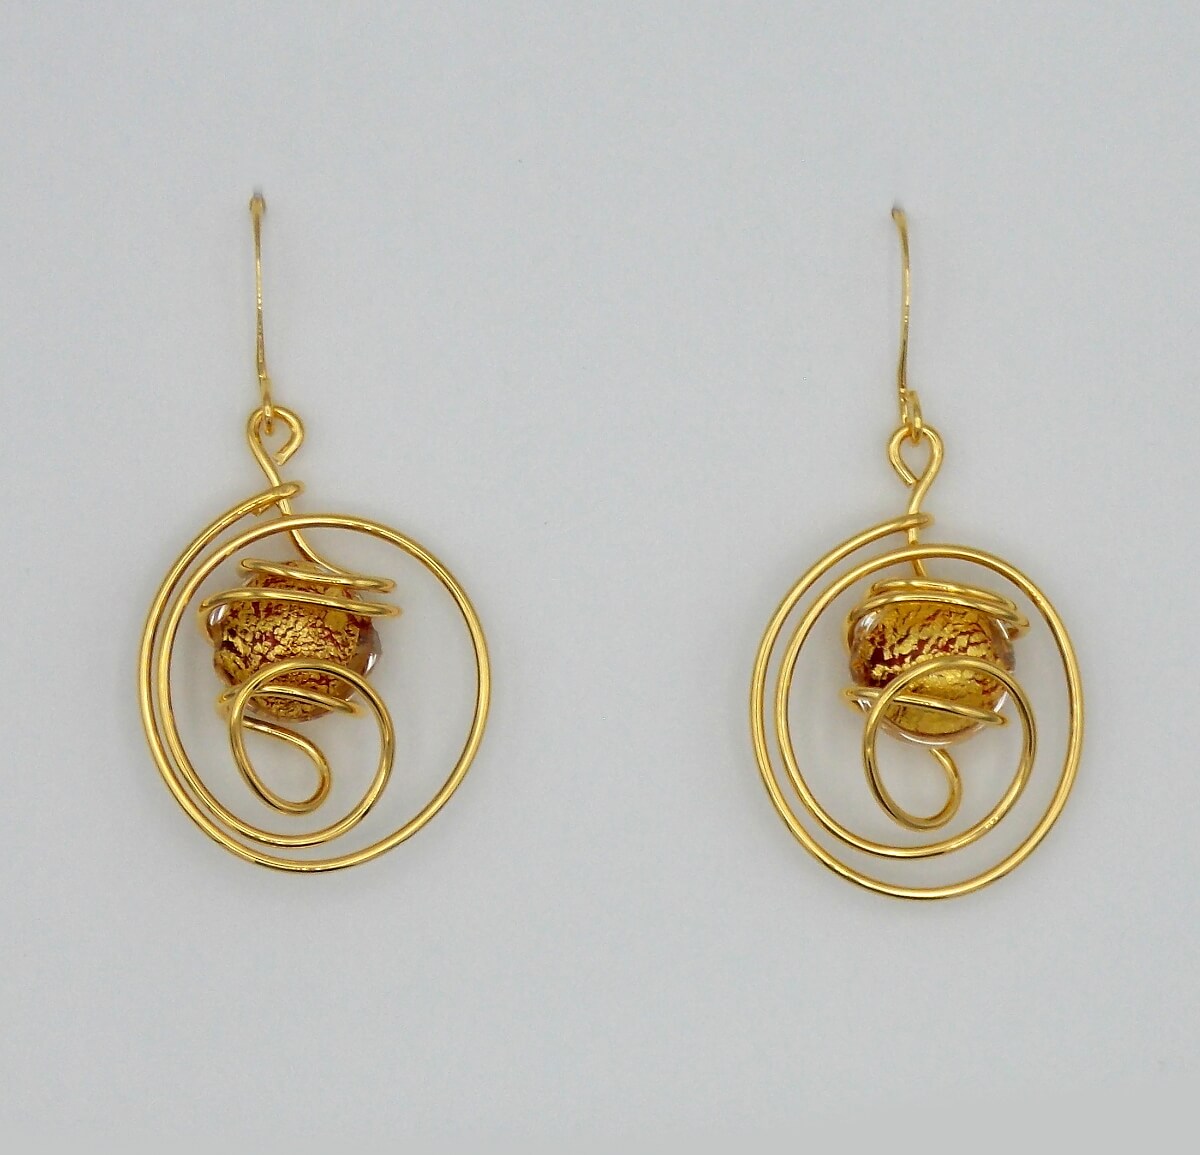 Gold rhodium metal swirled drop earrings with Murano glass gold and red glass bead